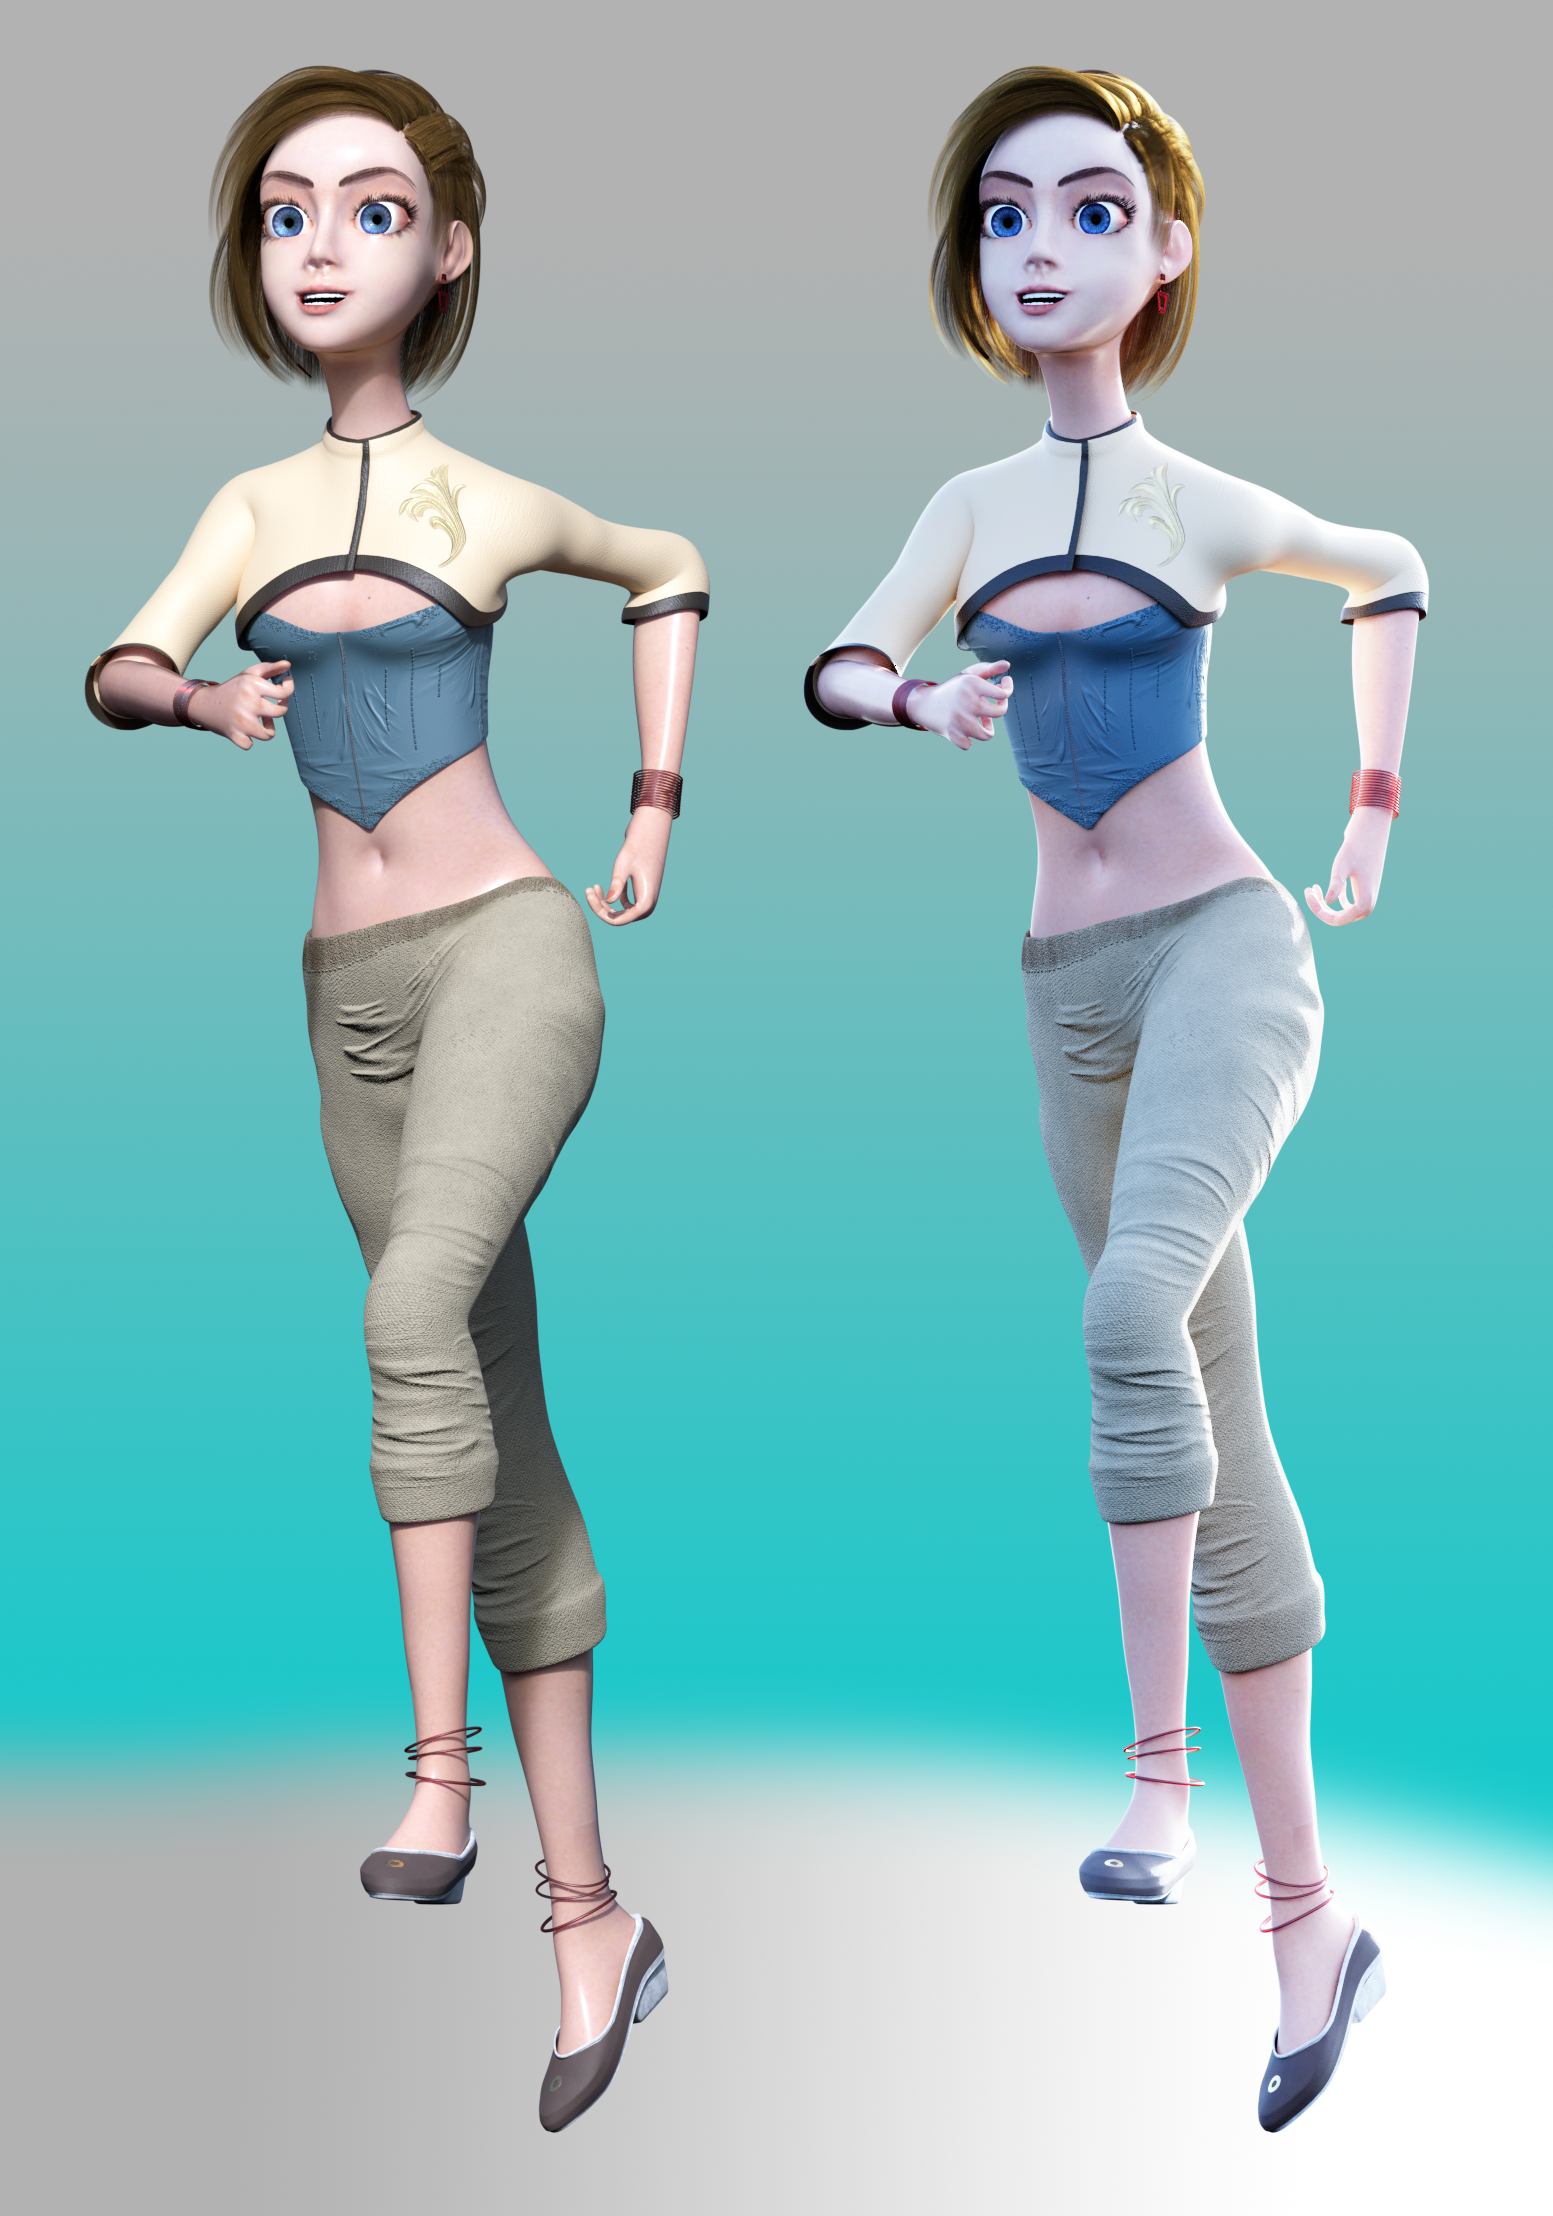 Marry Rigged Female Character in Blender Supports Unity Unreal by GeekyGreenOwl